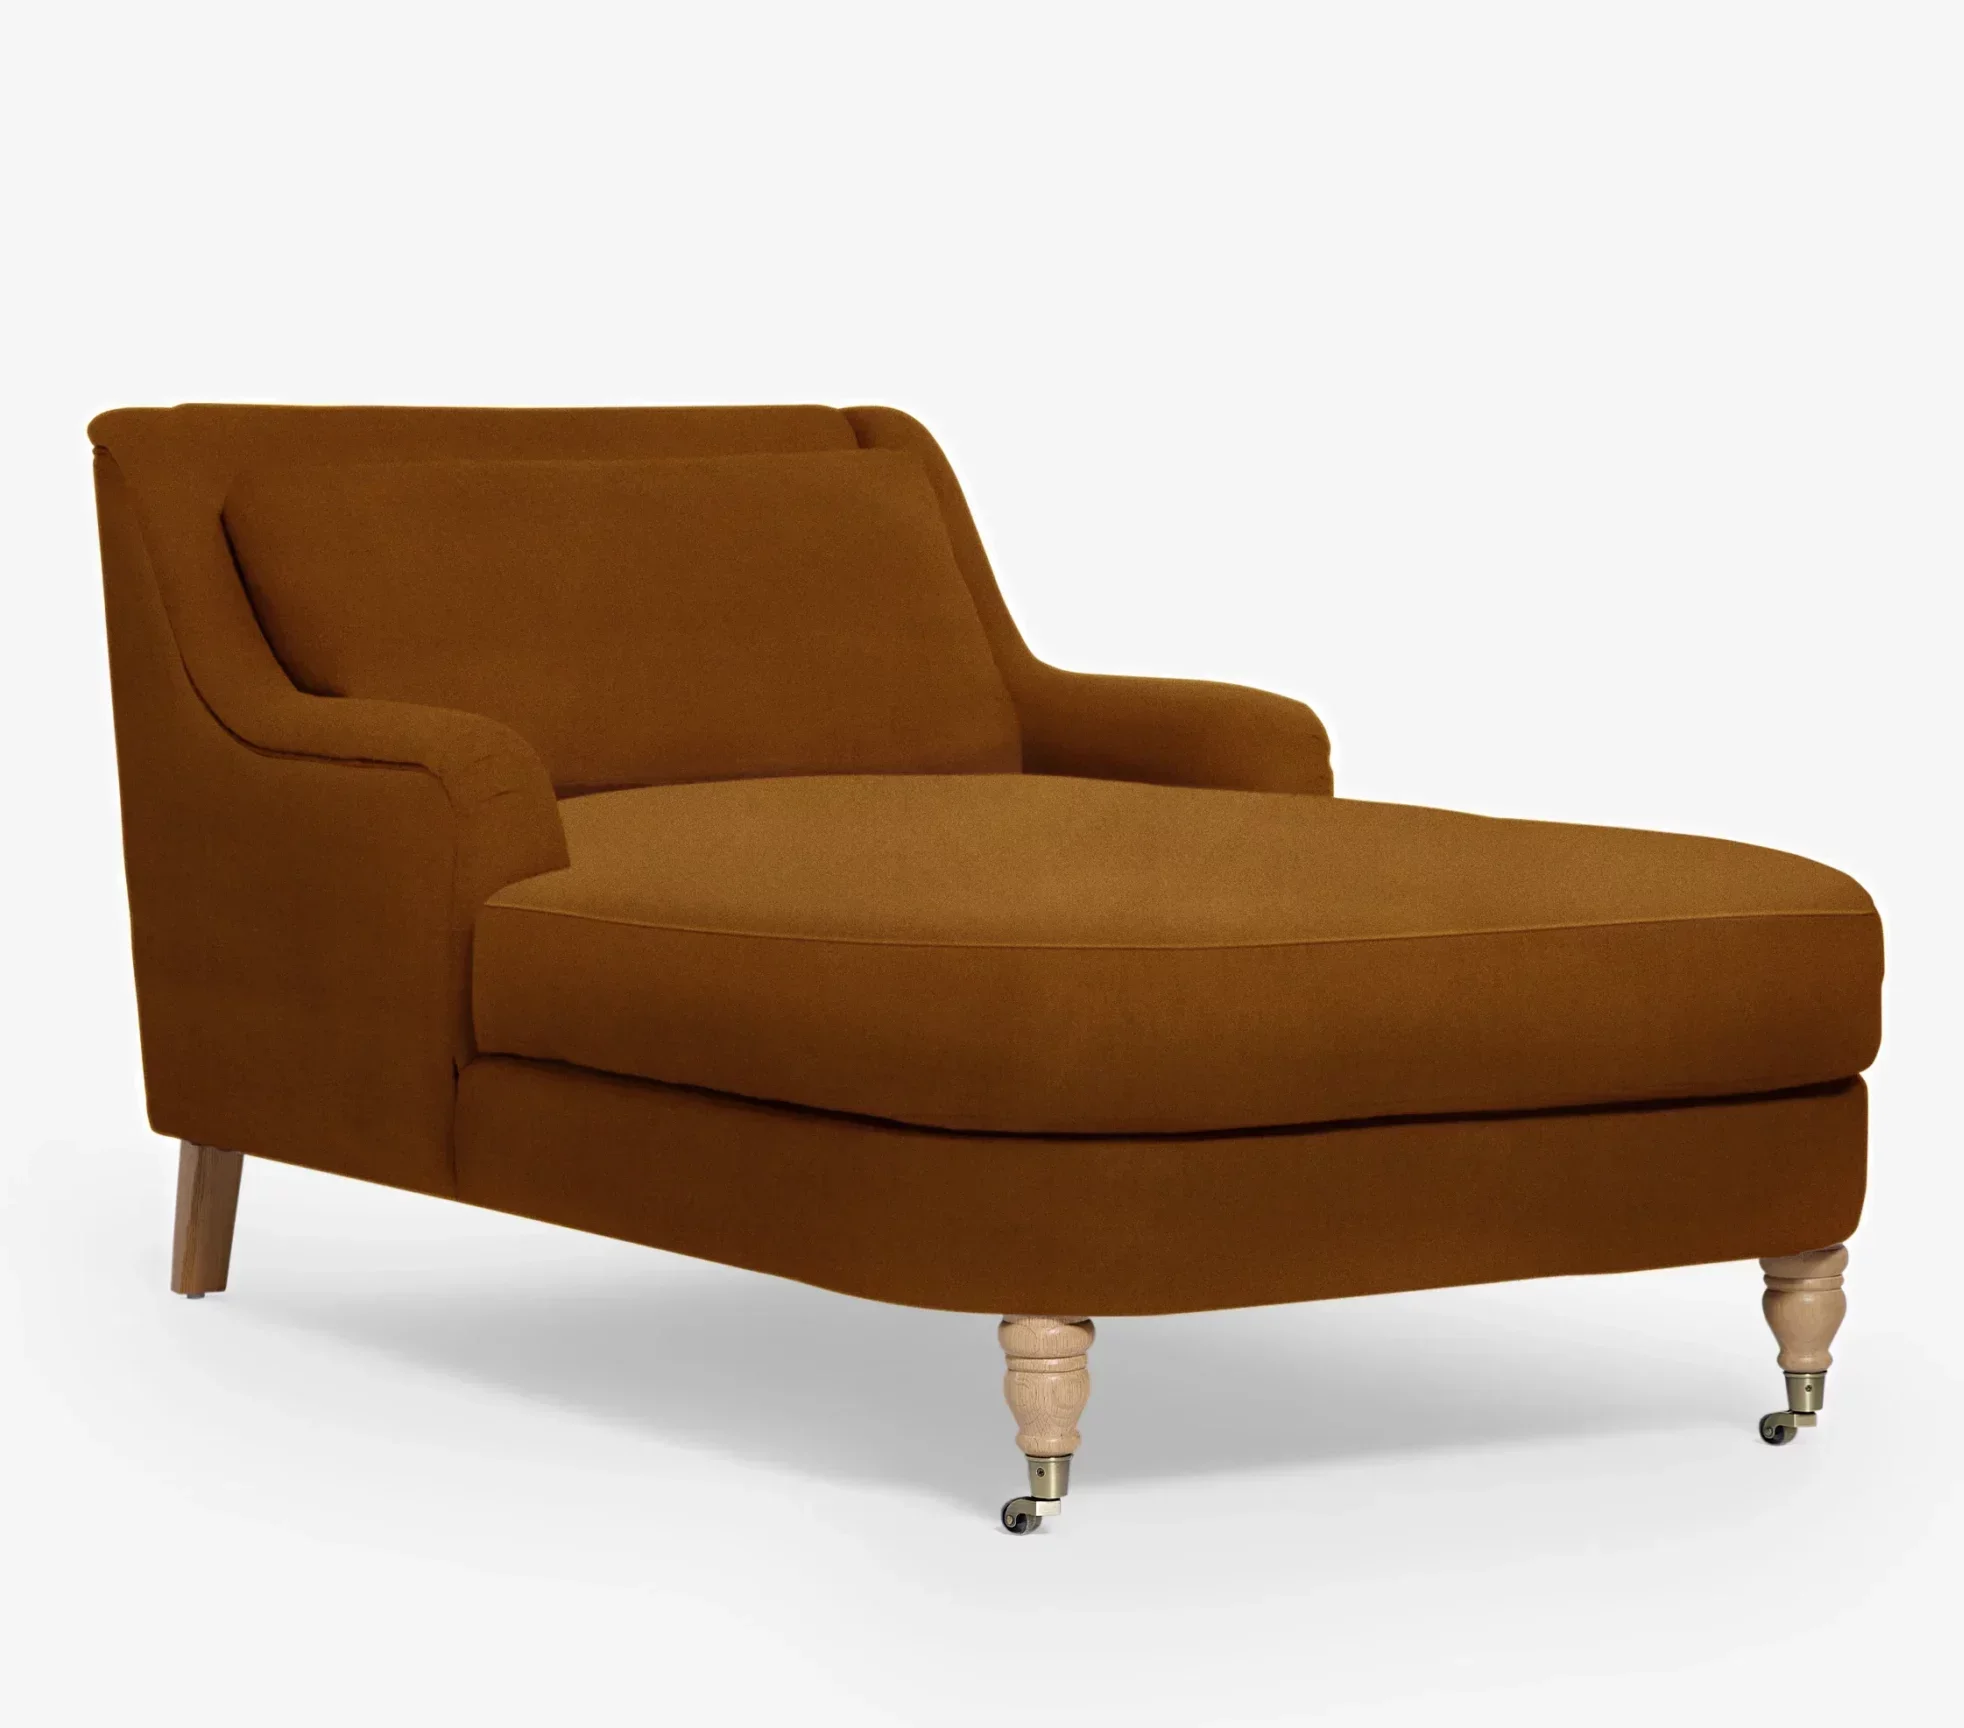 Even Your Tiny Living Room Can Feel Like a 5-Star Hotel With These 14 Chaise Lounges